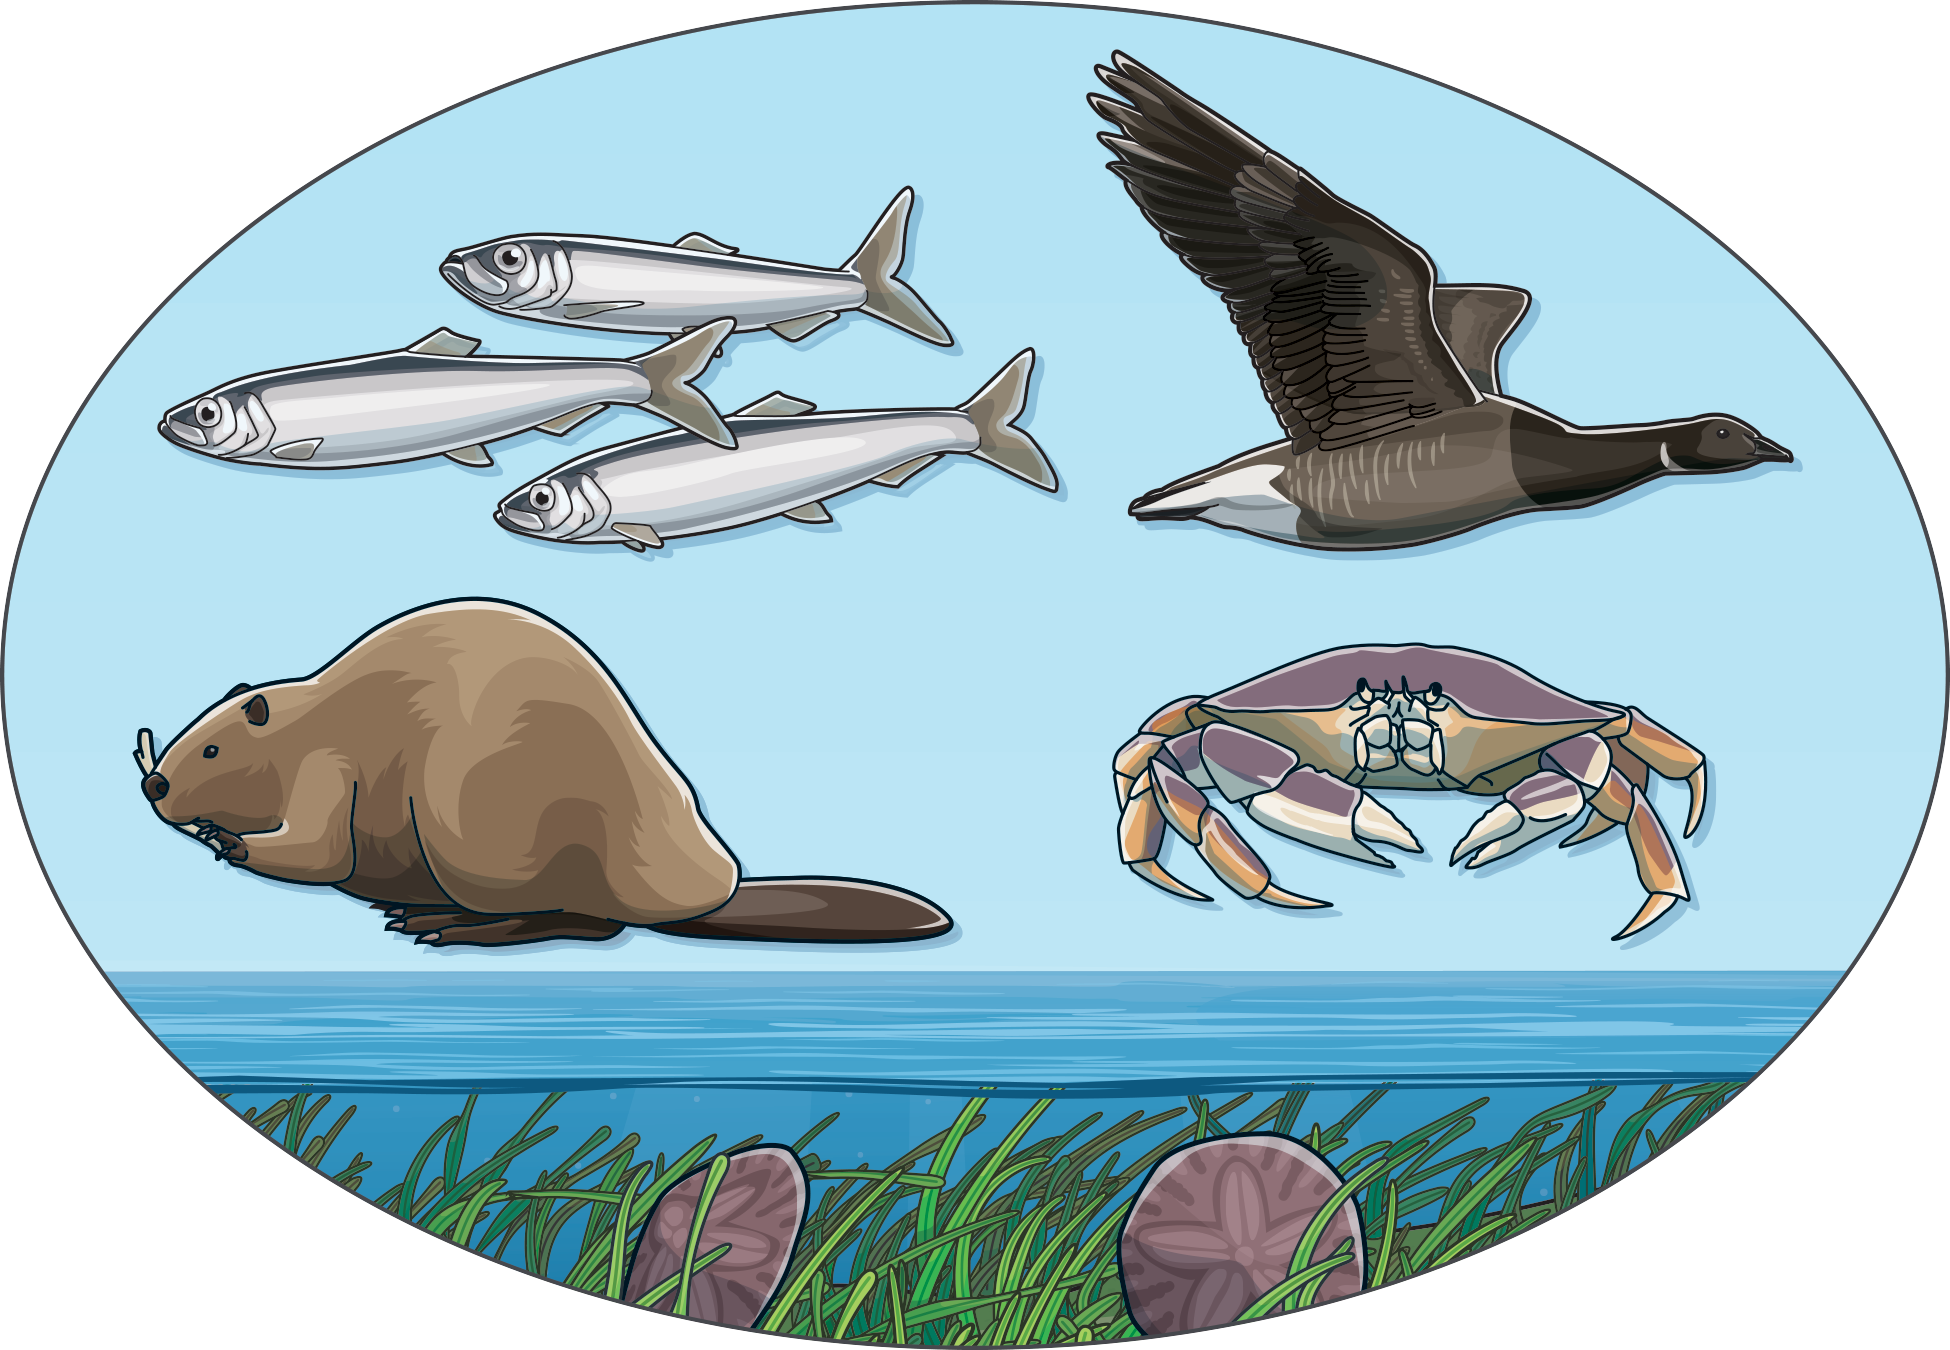 An illustration of fish, beavers. crabs, and a duck